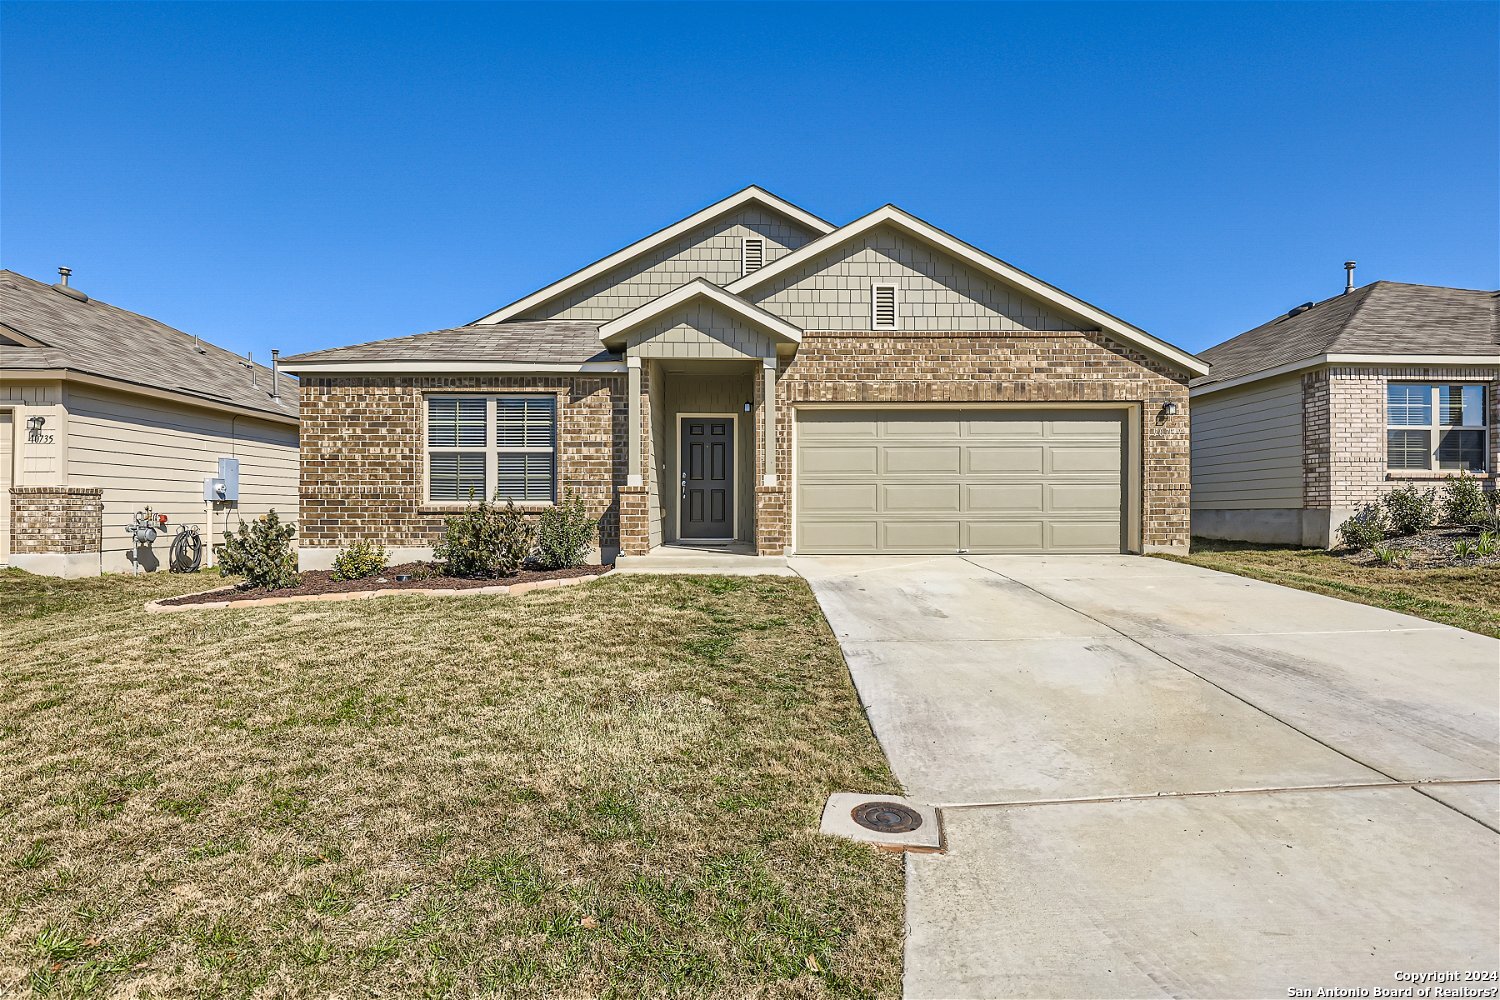 Photo of 10739 Francisco Wy in Converse, TX